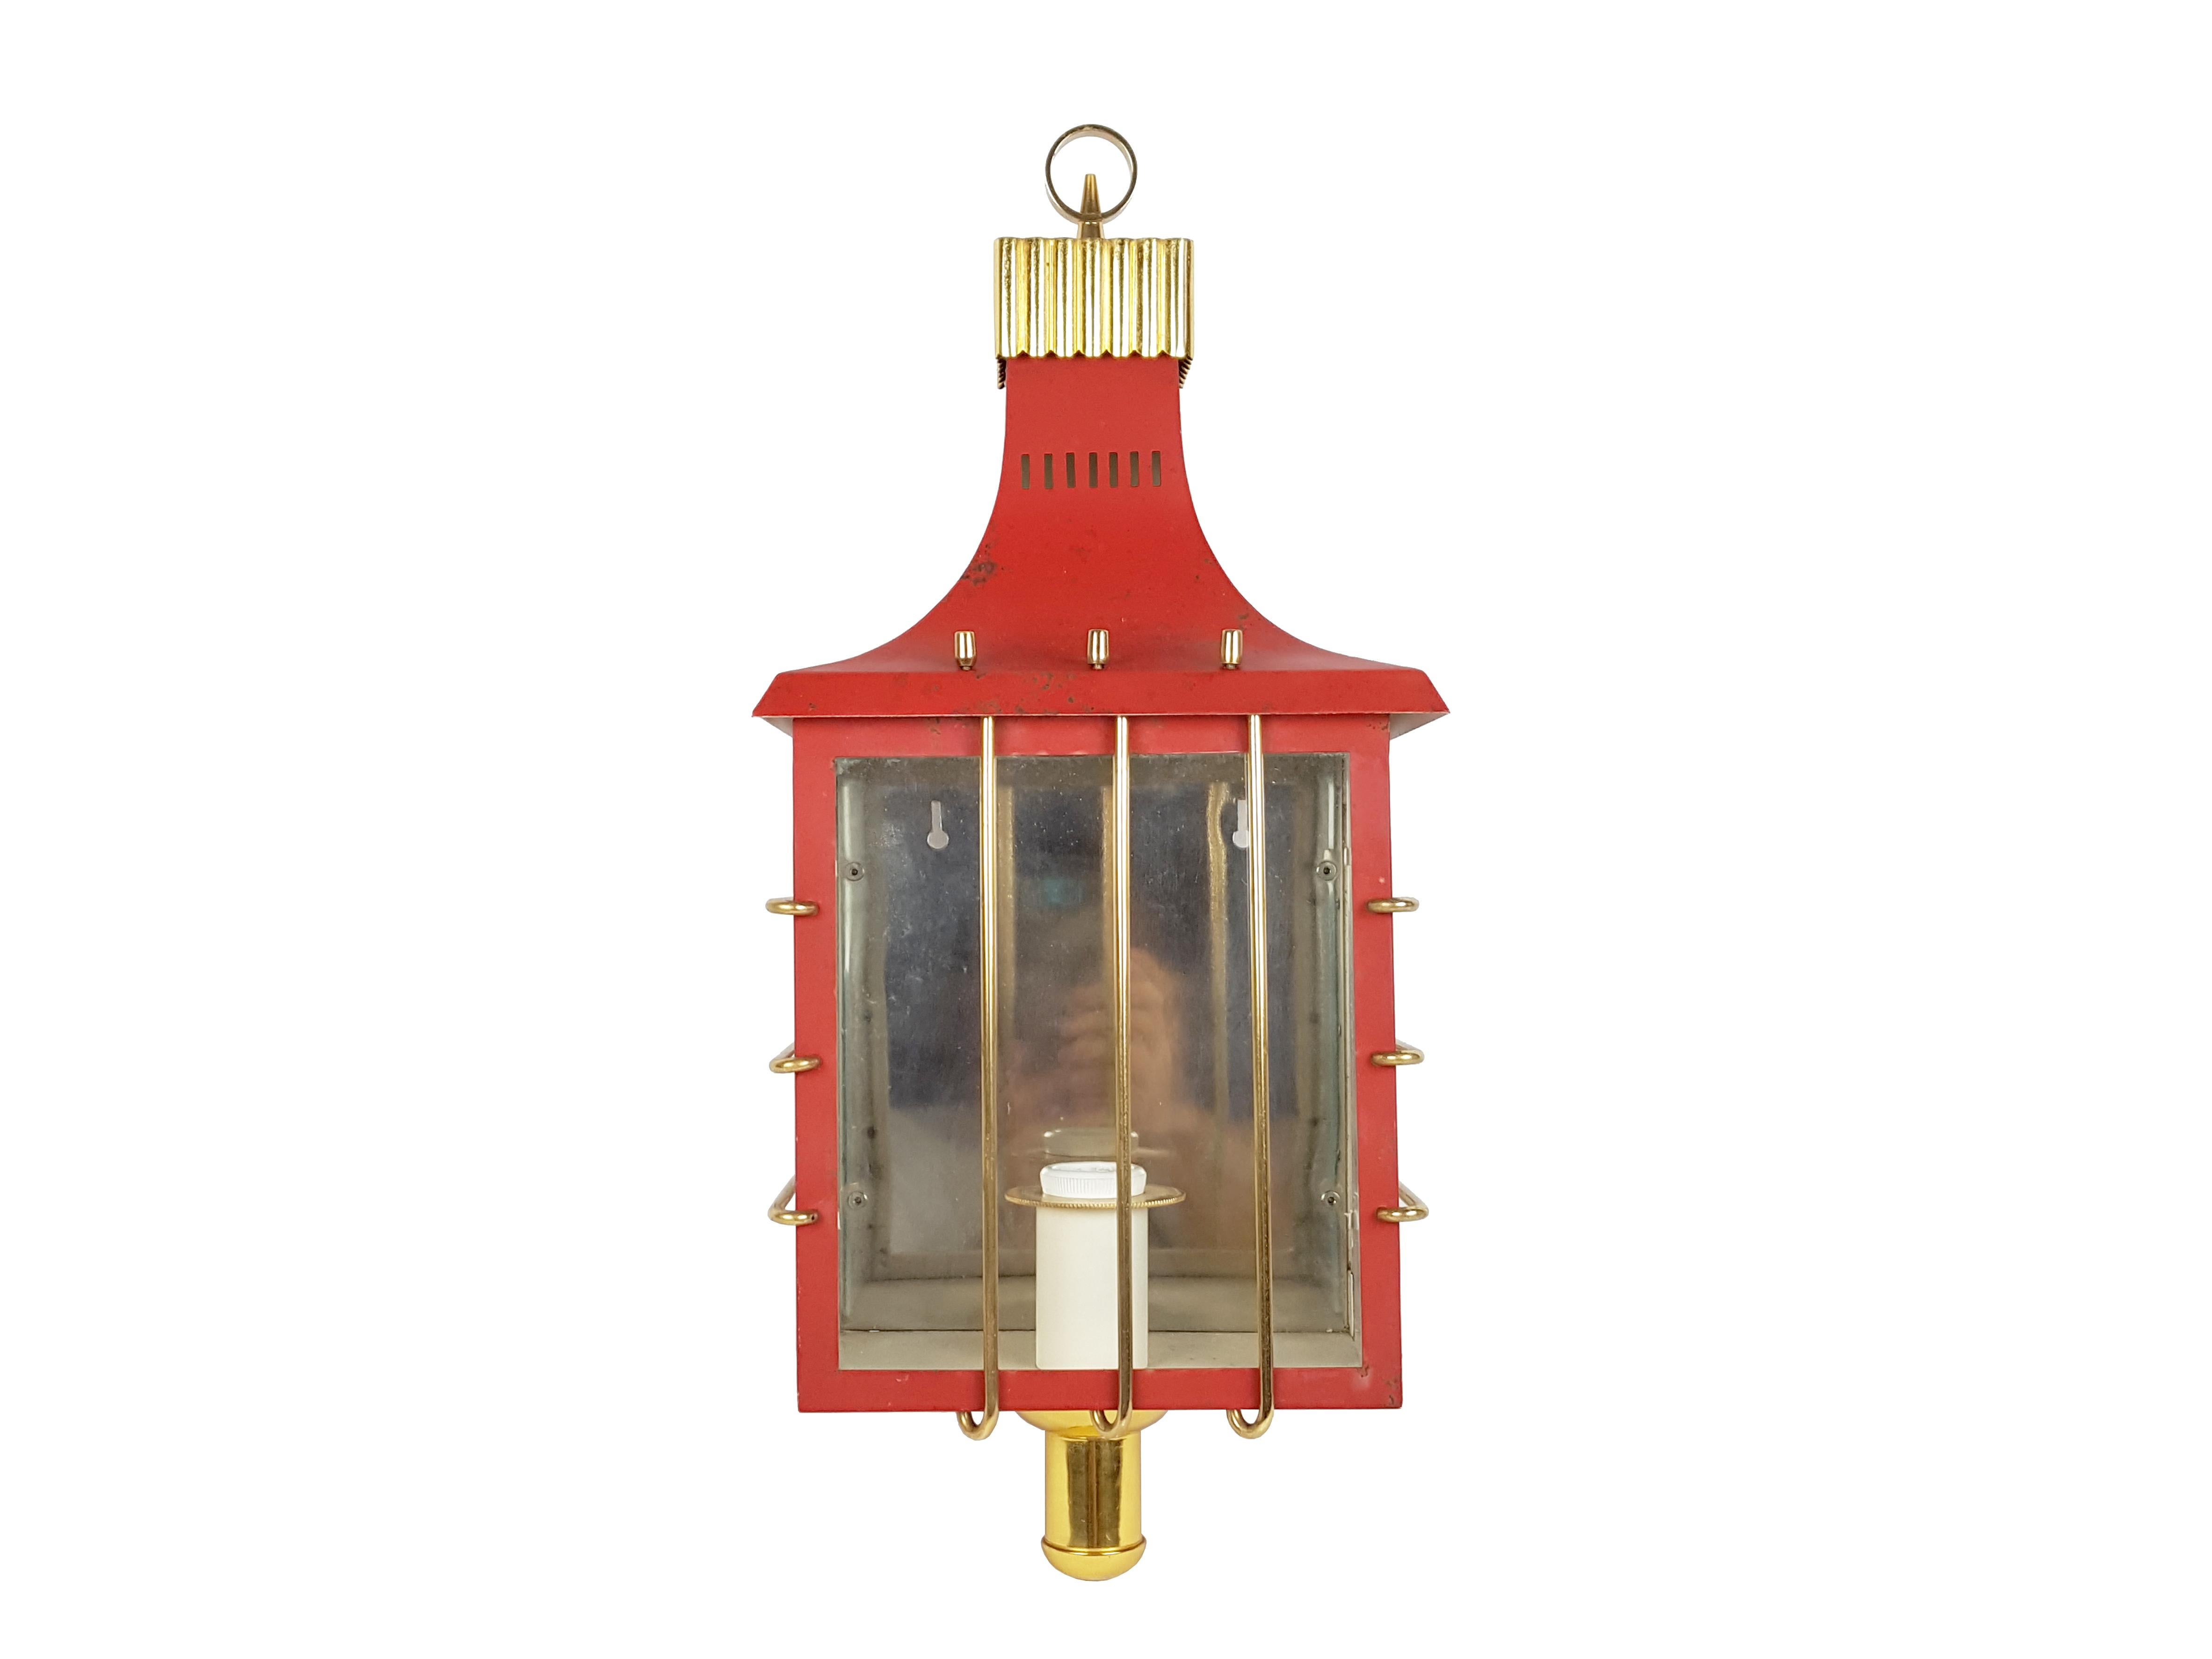 Large beautiful and decorative wall lamp produced in Italy in the late 1950s. It is made from a red painted metal structure with glass and brass decorative elements. Visible oxidation defects and paint losses in the upper side, as showed in